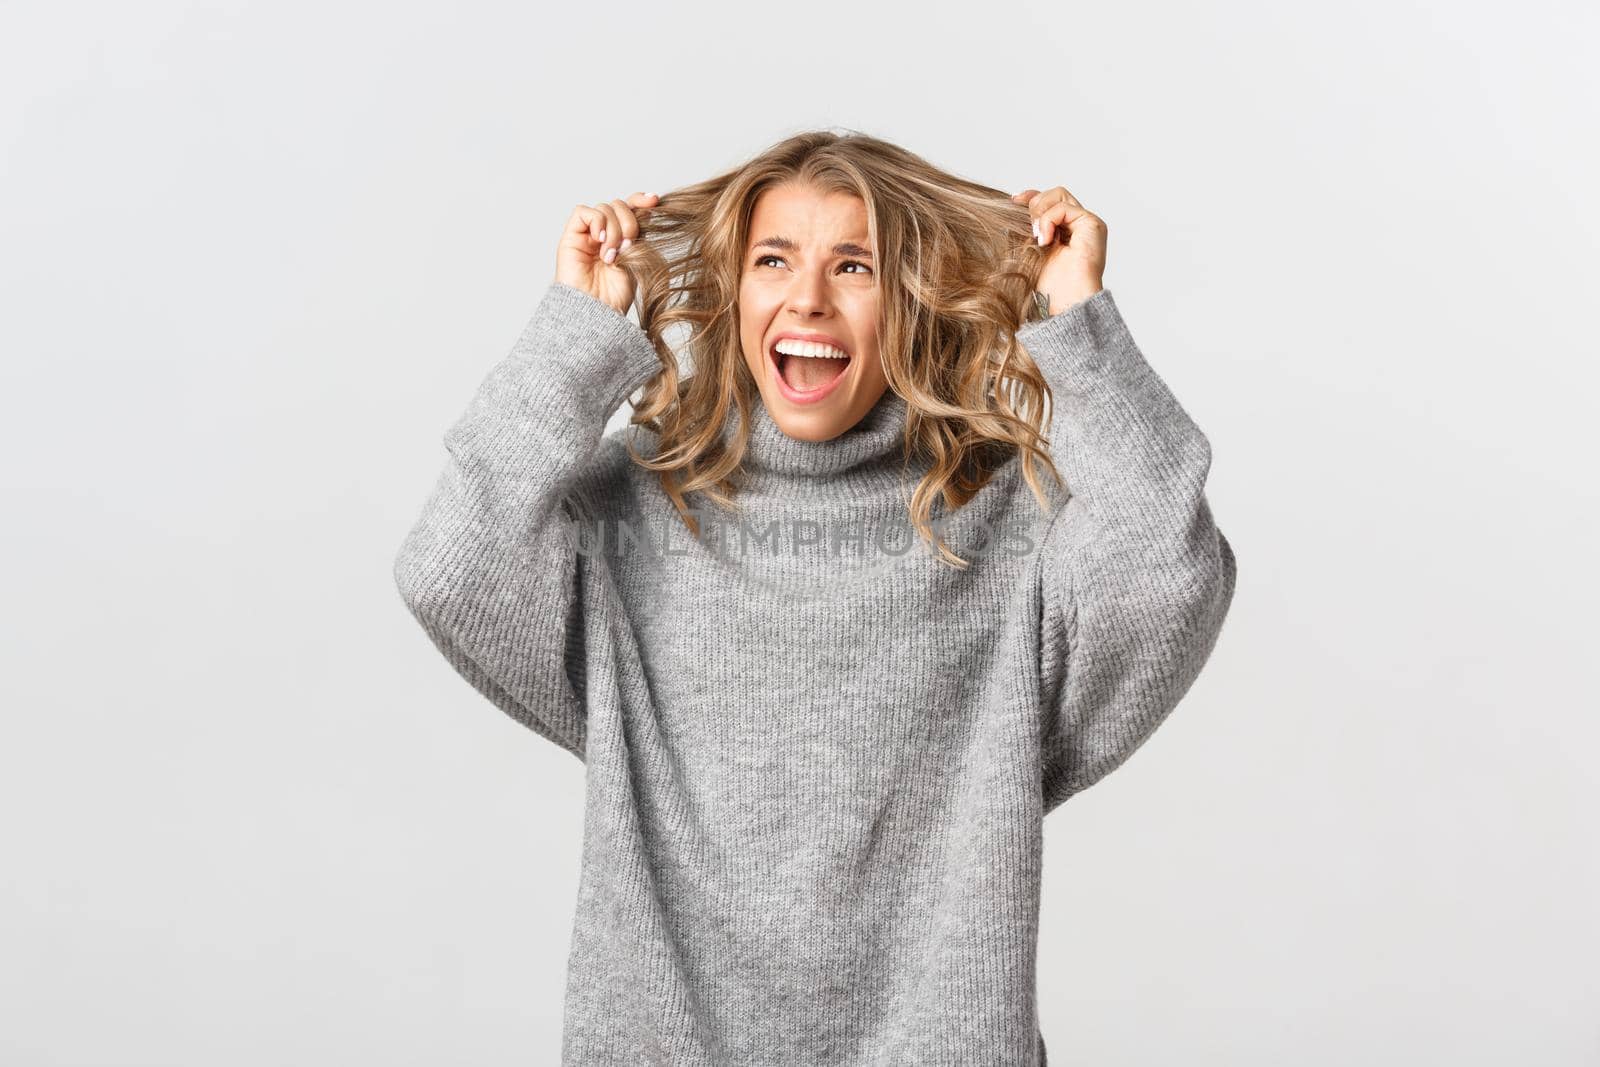 Image of nervous blond woman in panic, ripping hair on head and screaming alarmed, standing distressed against white background.